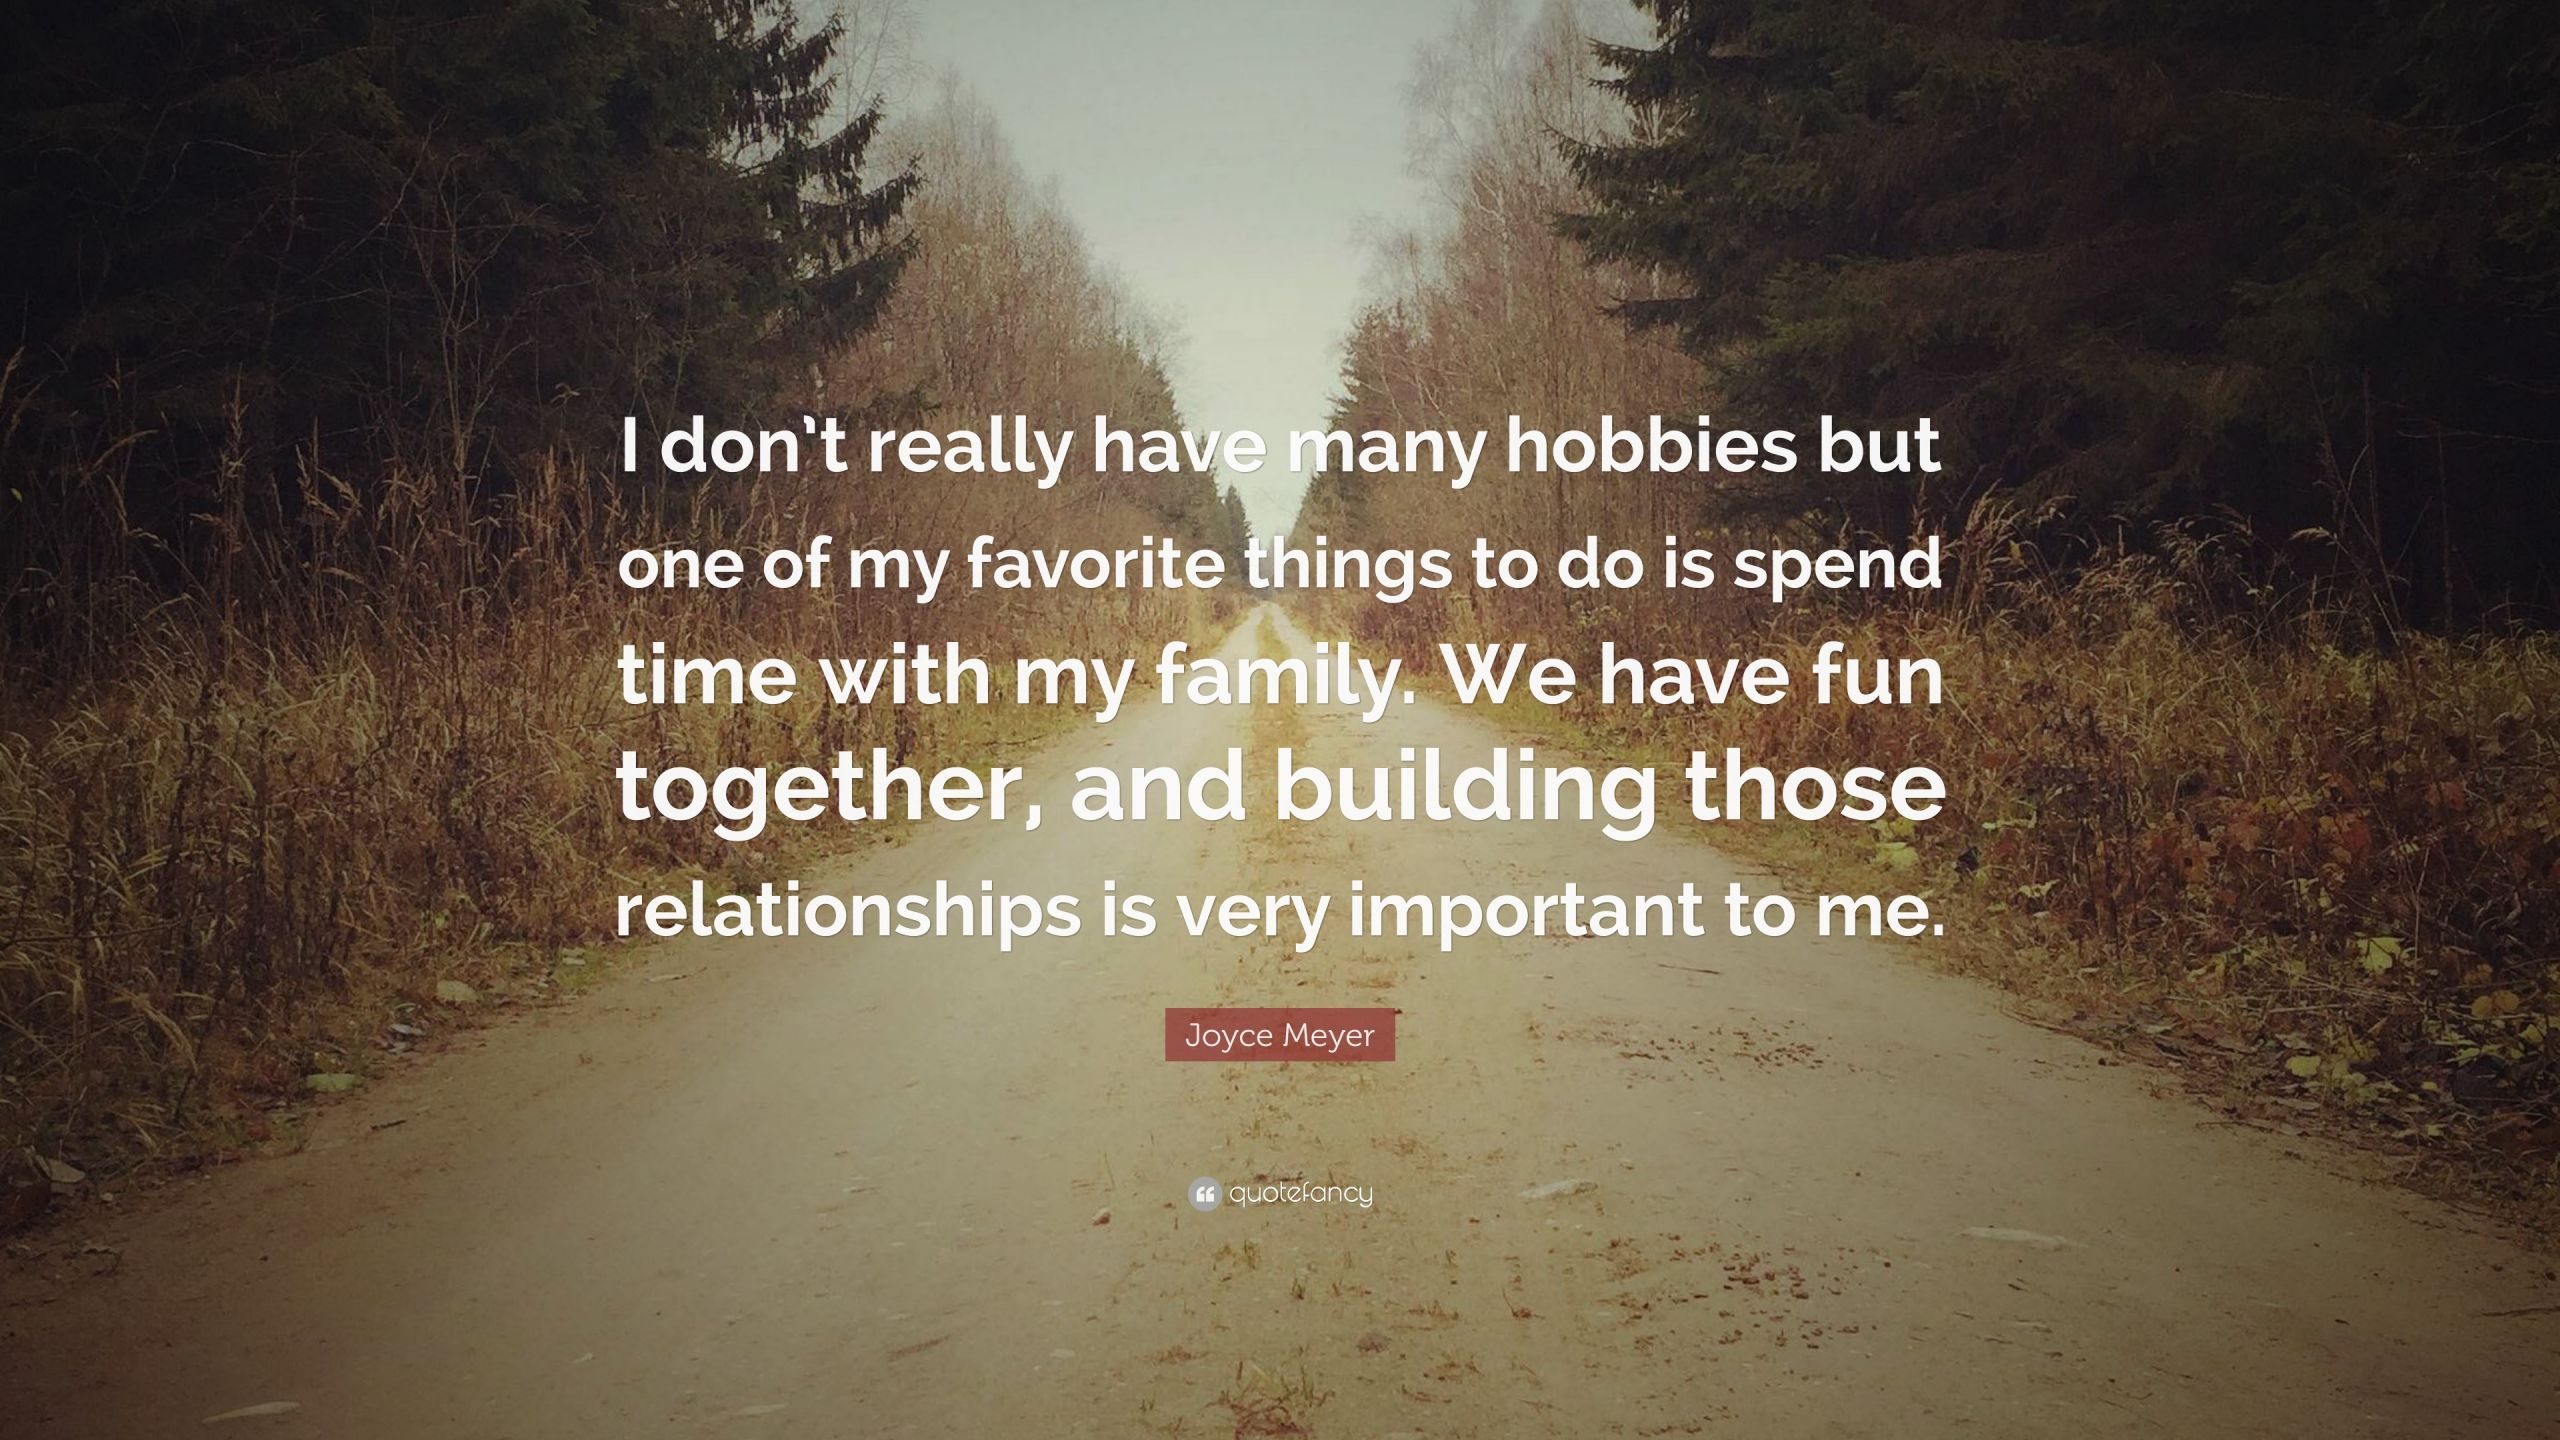 Joyce Meyer Quotes On Relationships
 Joyce Meyer Quote “I don’t really have many hobbies but